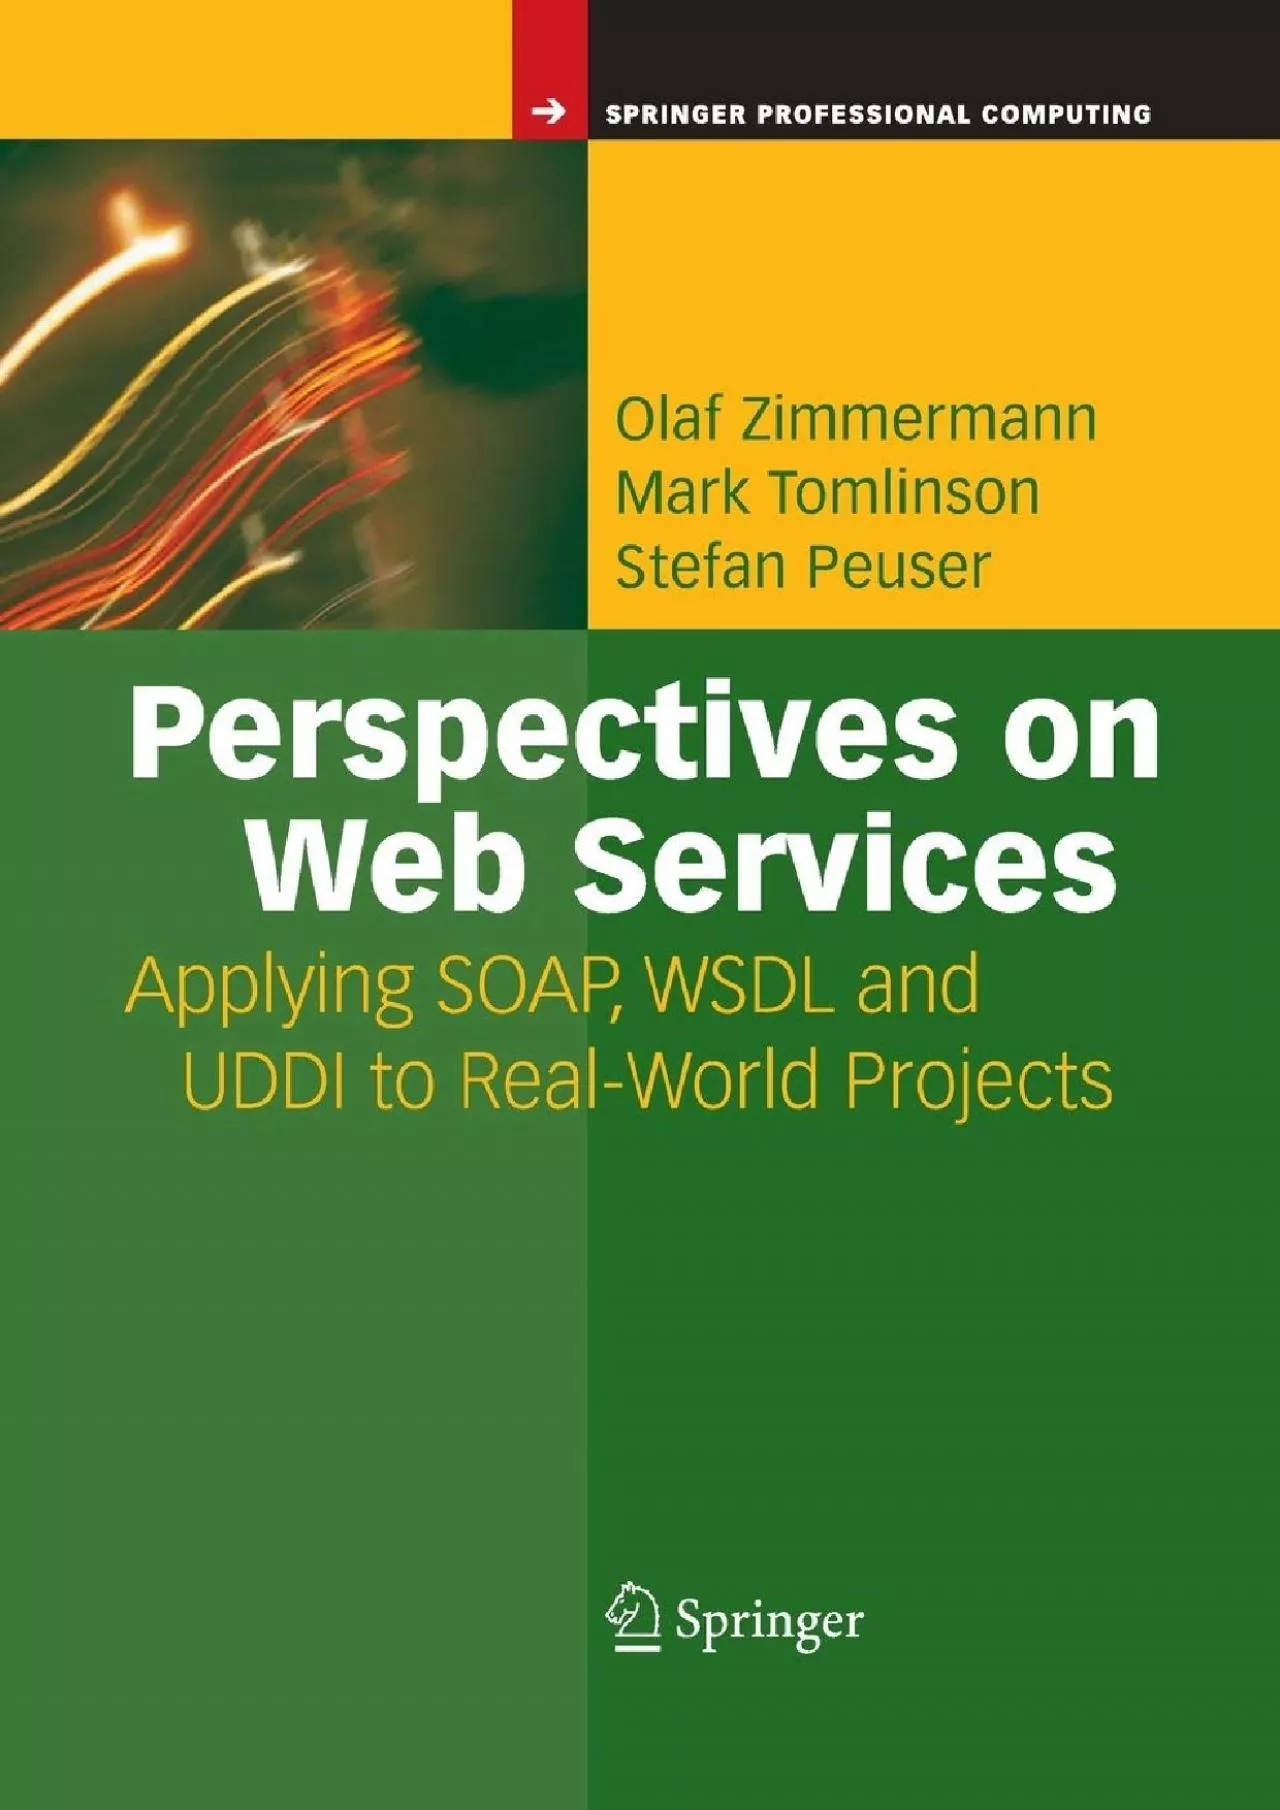 [READING BOOK]-Perspectives on Web Services: Applying SOAP, WSDL and UDDI to Real-World